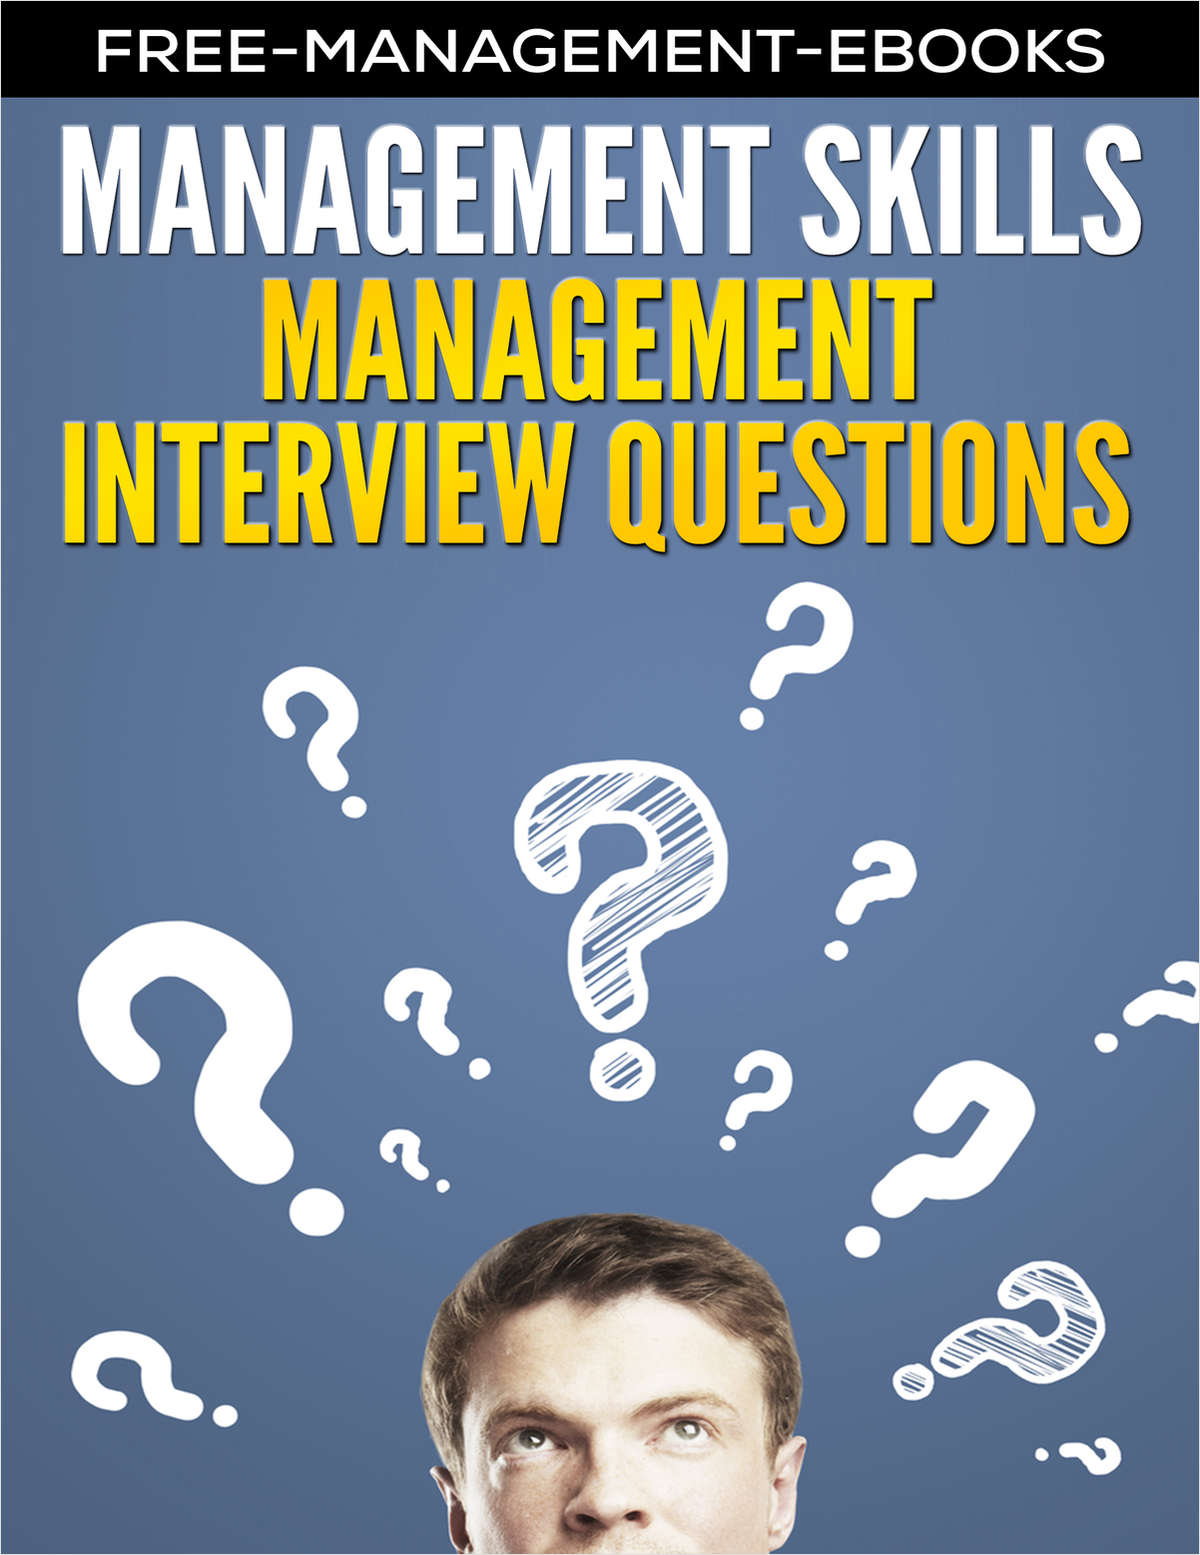 Management Interview Questions - Developing Your Management Skills